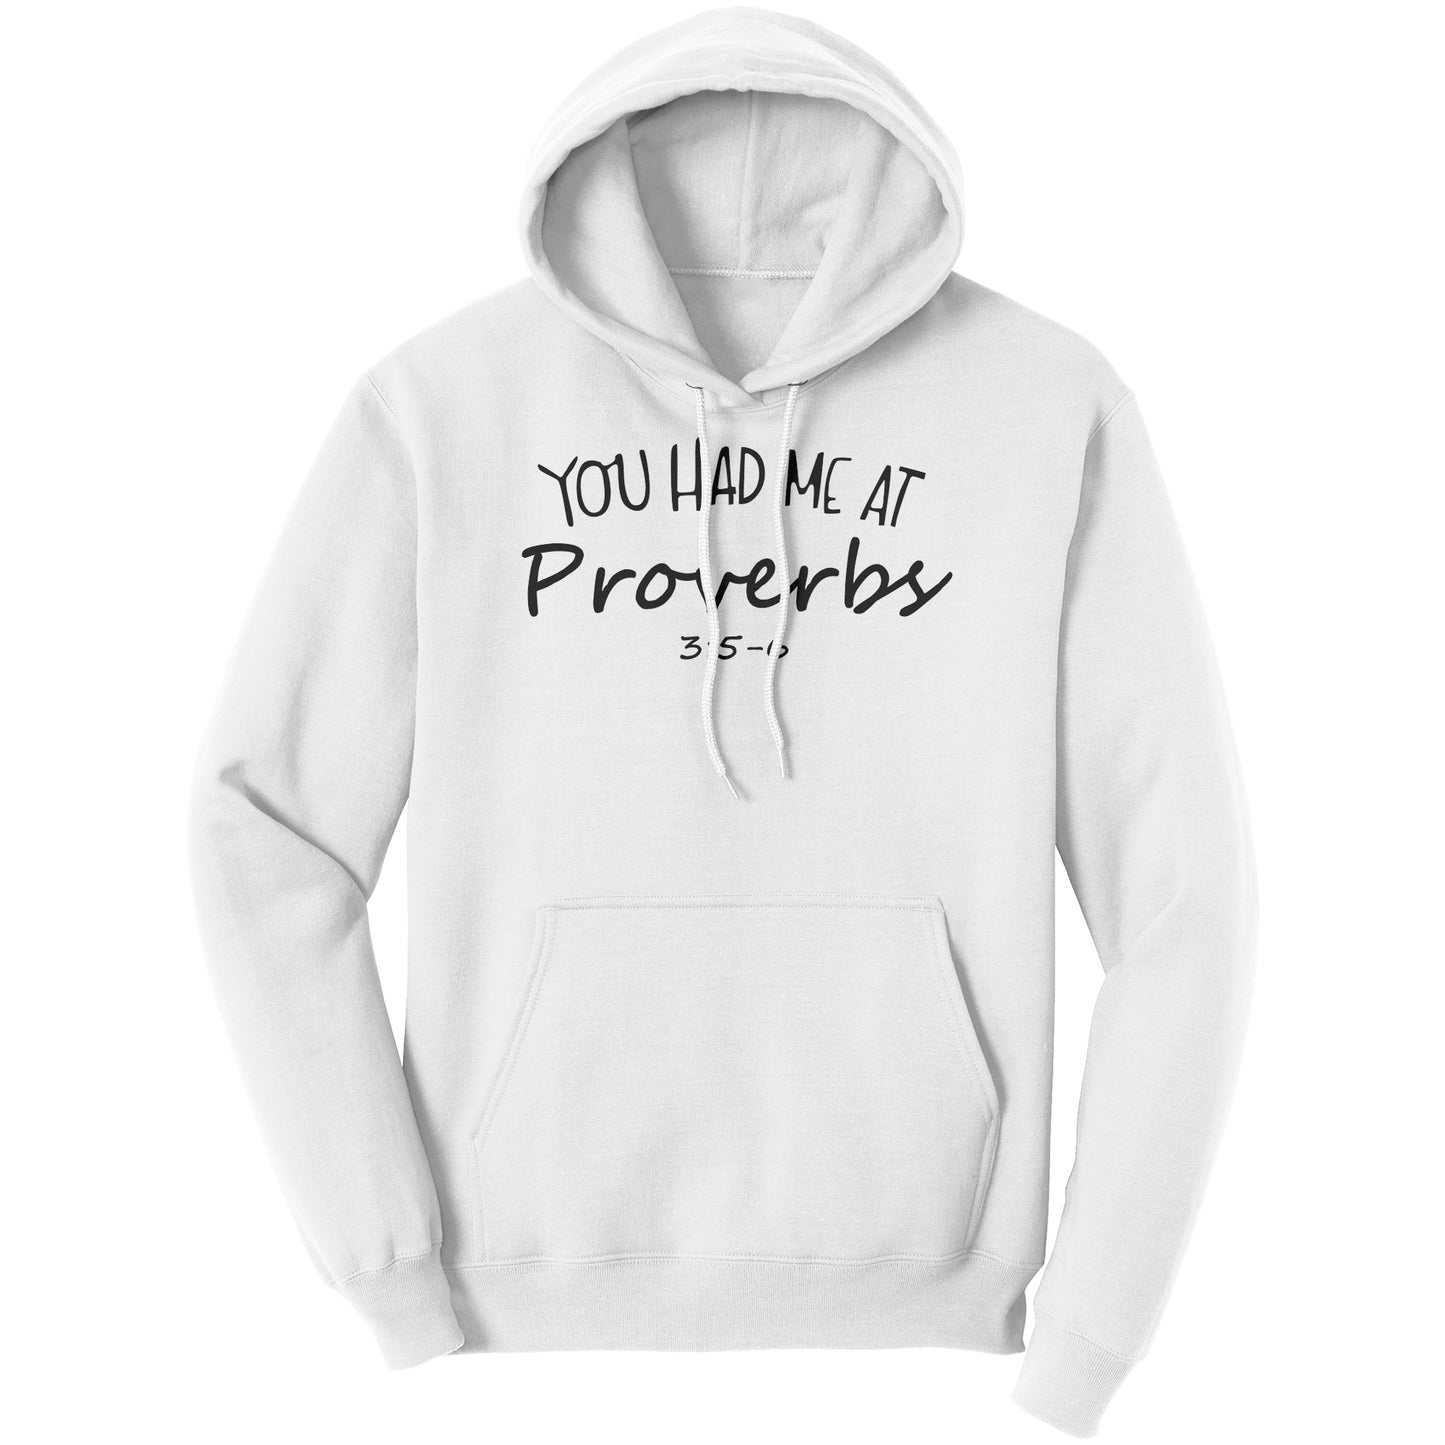 You Had Me At Proverbs 3:5-6 Hoodie Part 1